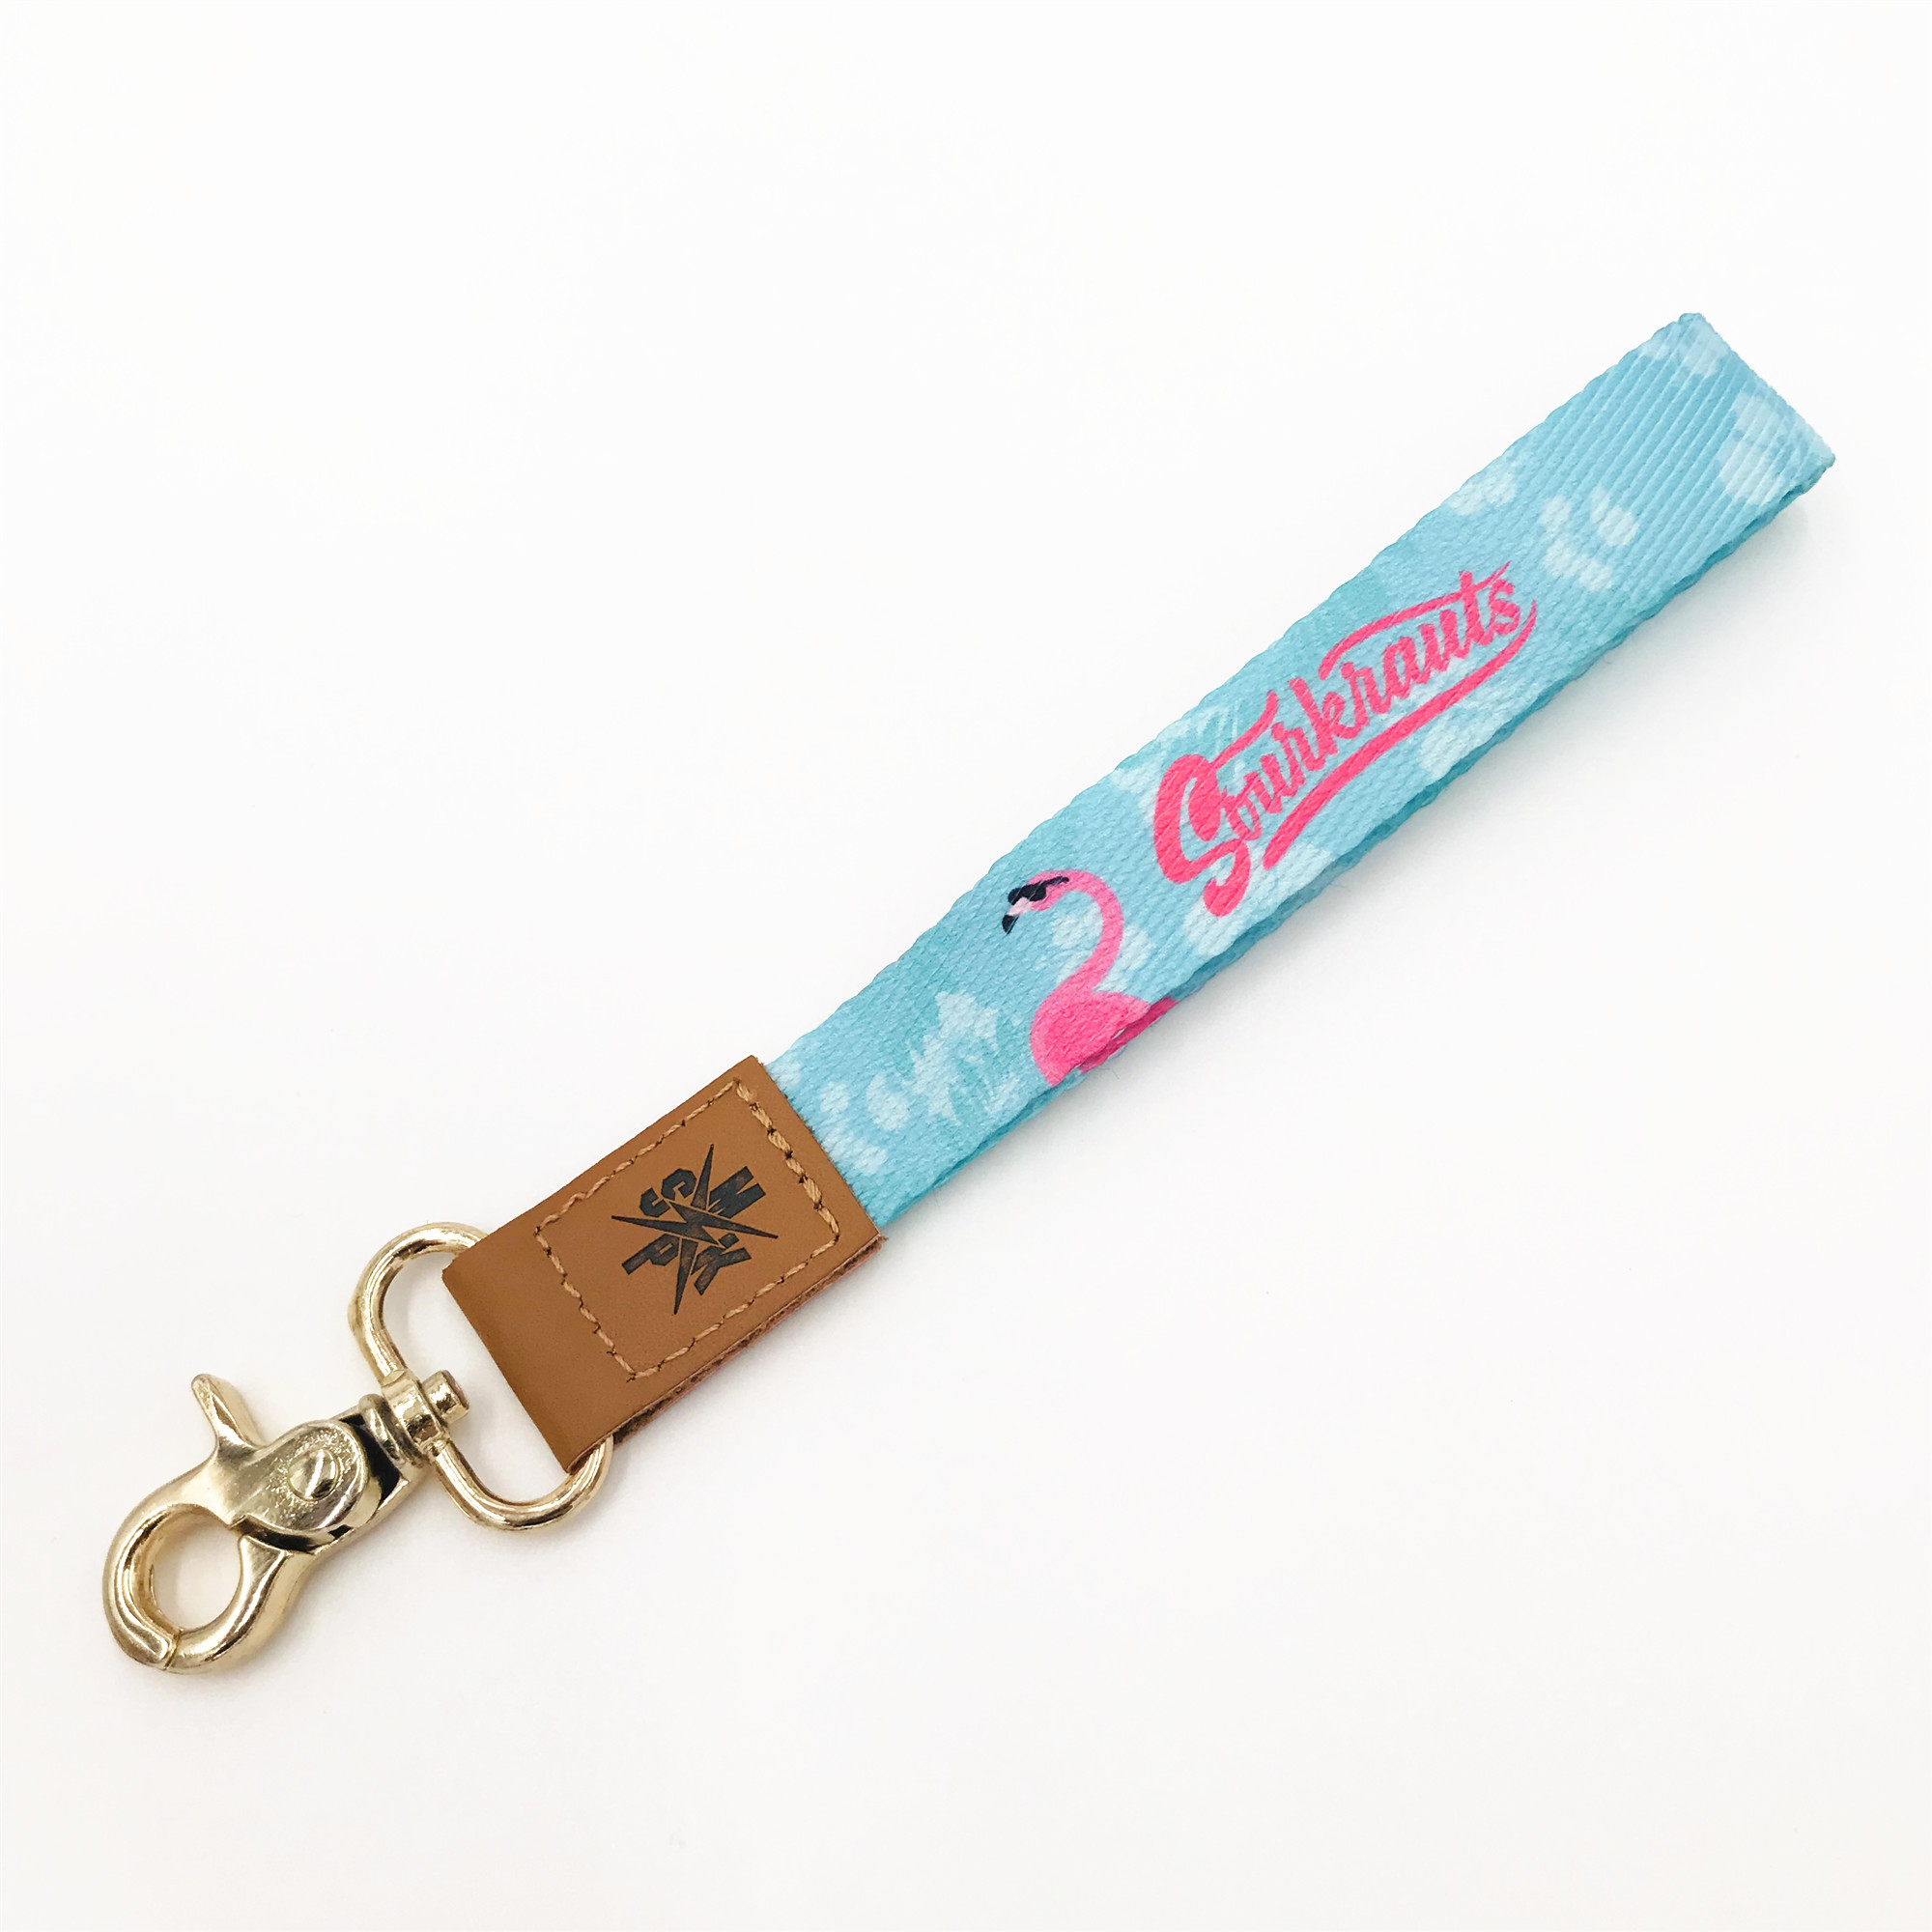 High quality tool lanyards sublimation polyester lanyard